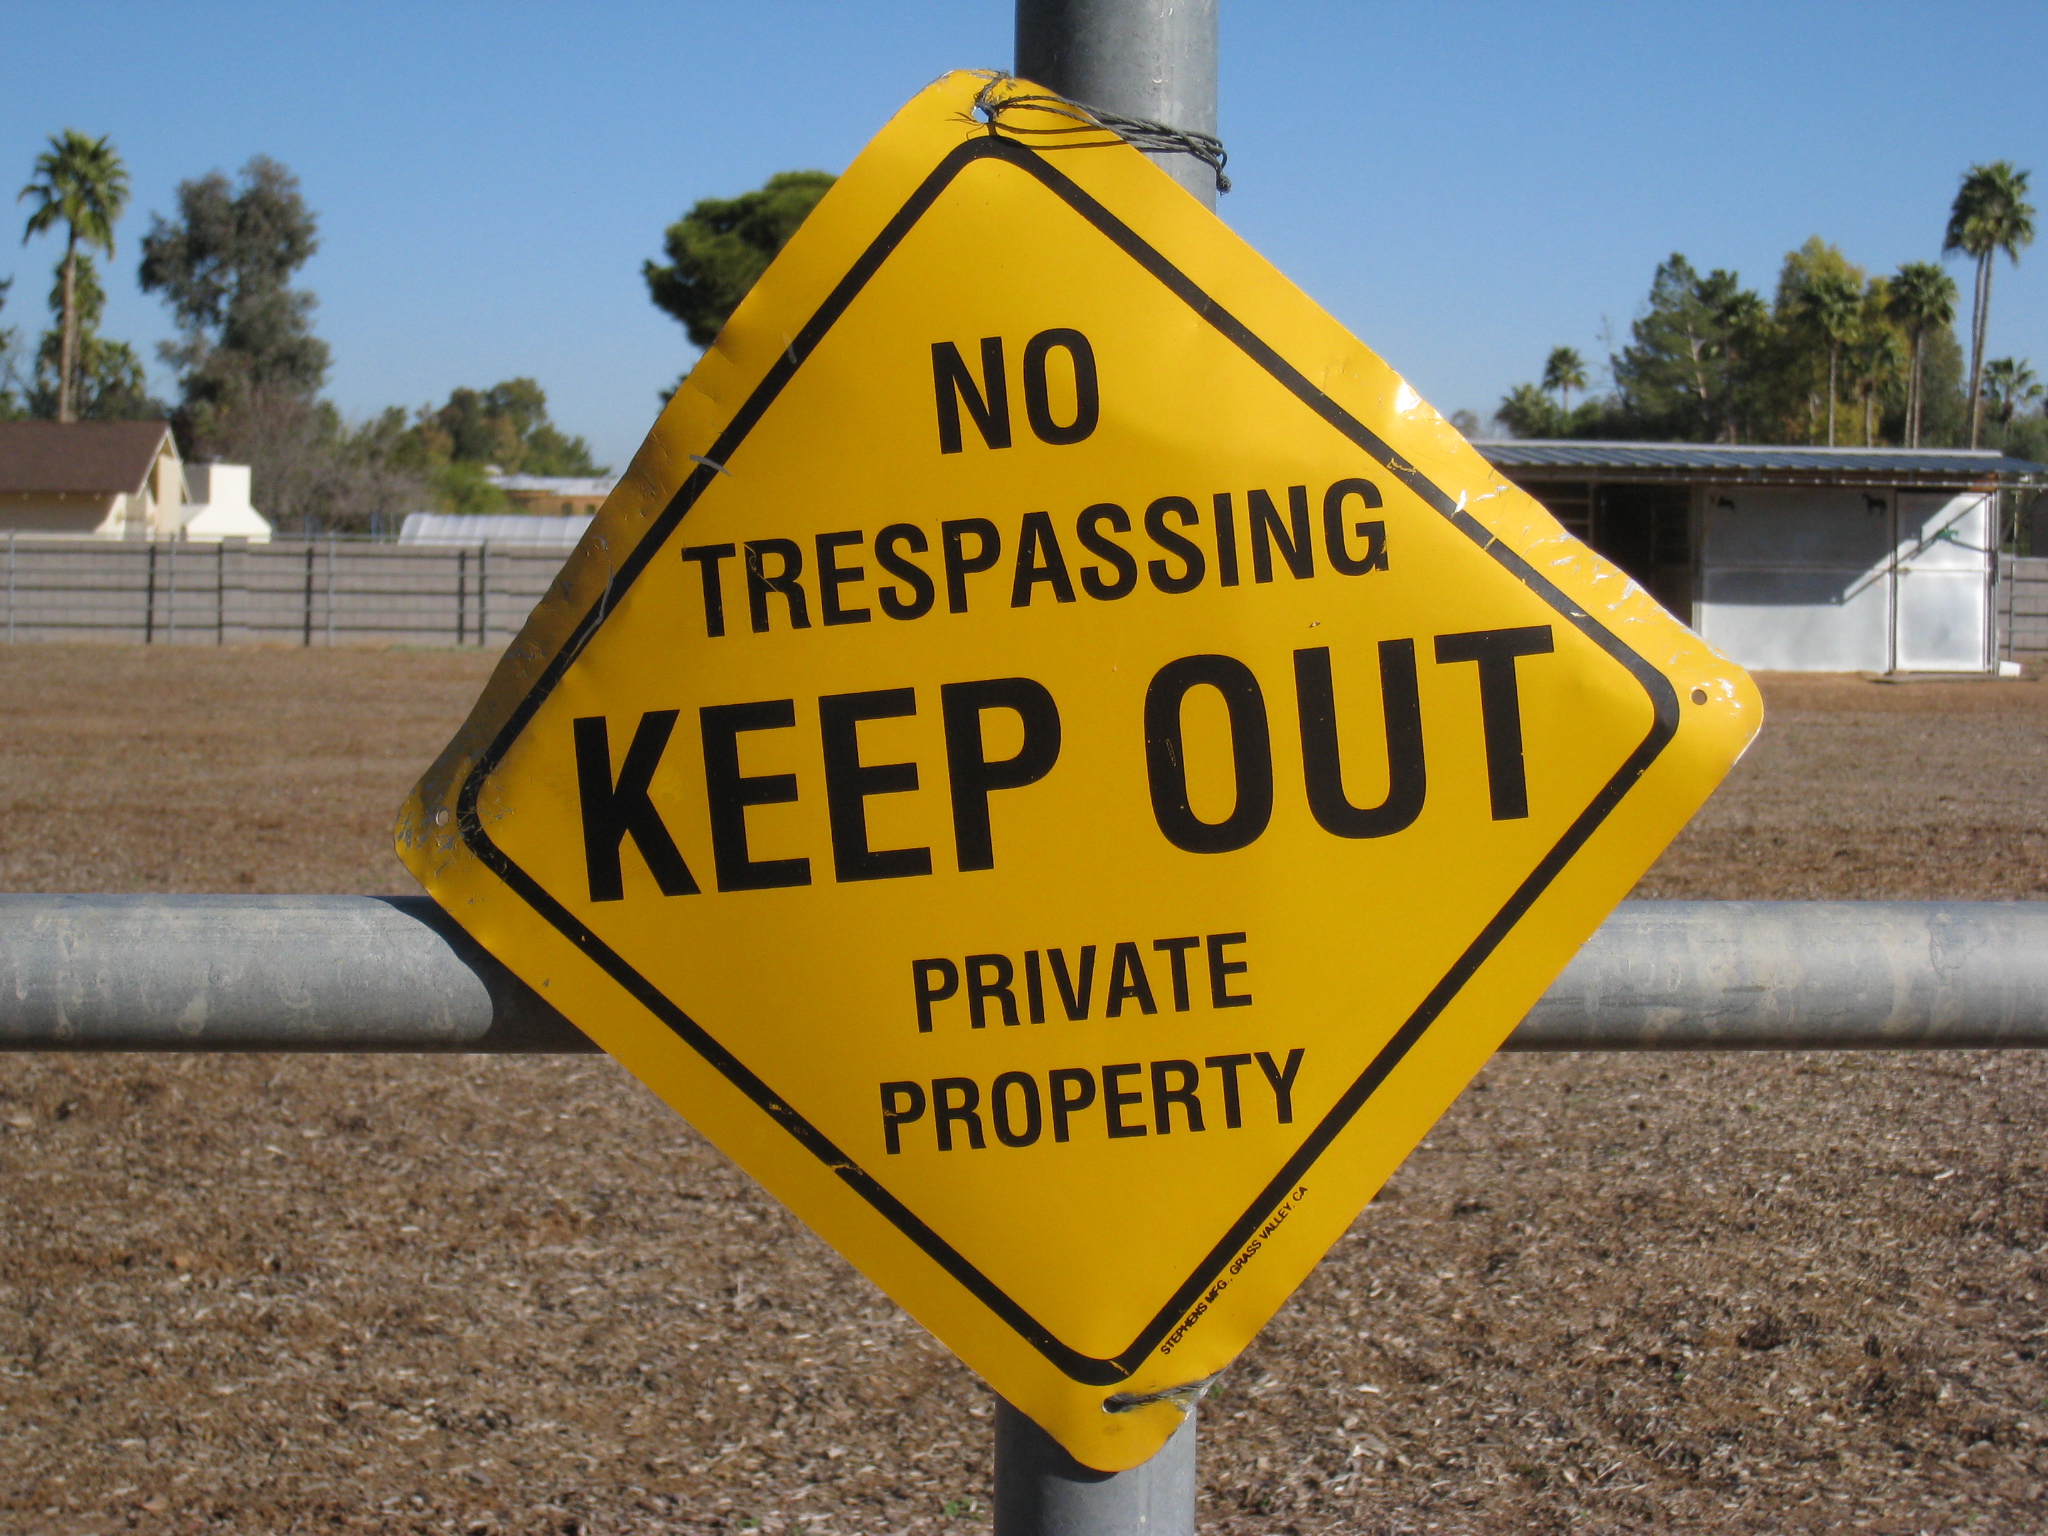 File:Keep out.jpg - Wikimedia Commons